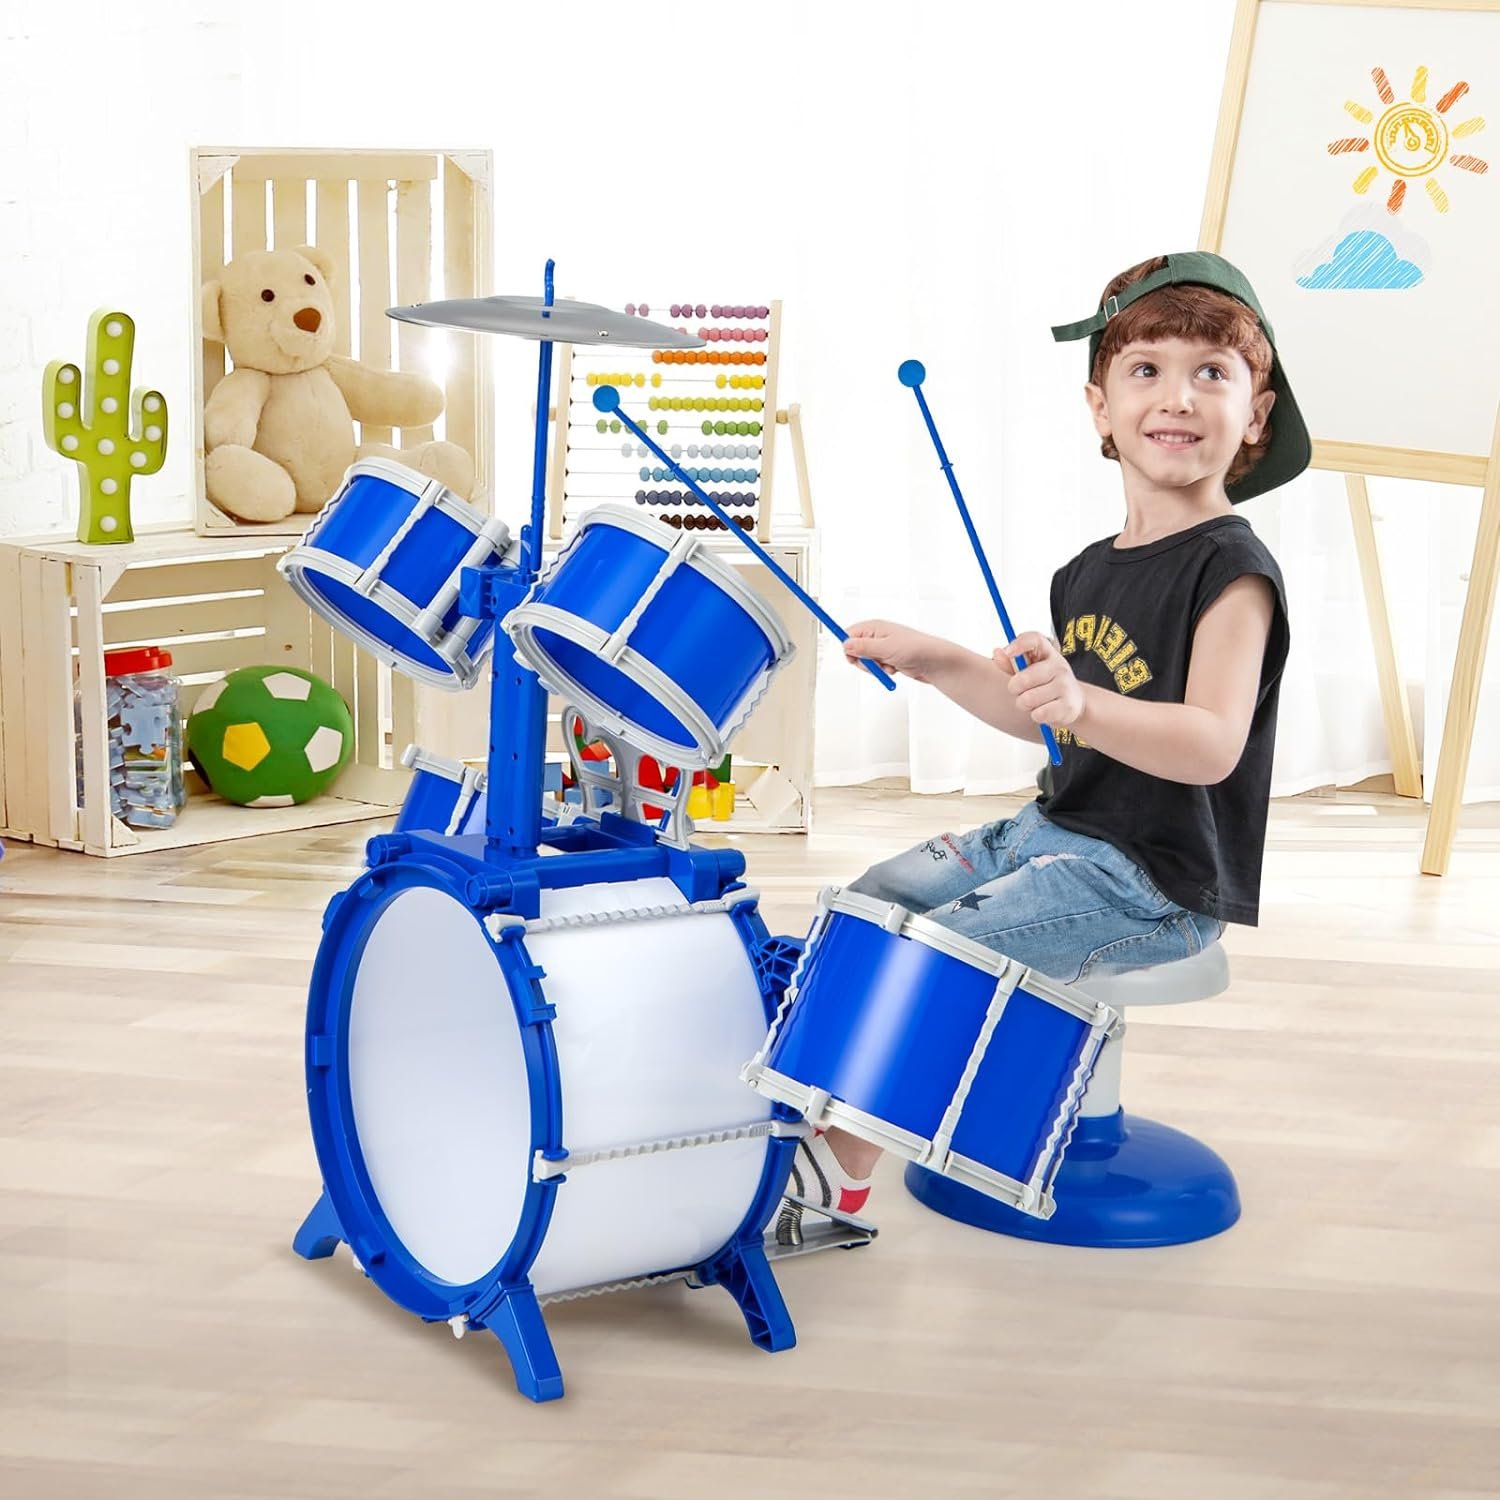 HONEY JOY Kids Drum Set, Toddler Jazz Drum Kit w/ 5 Drums, Stool, Pedal, 2 Drum Sticks  Music Stand, Percussion Musical Instruments for Boys Girls Christmas Birthday, Toddler Drum Set Ages 3+